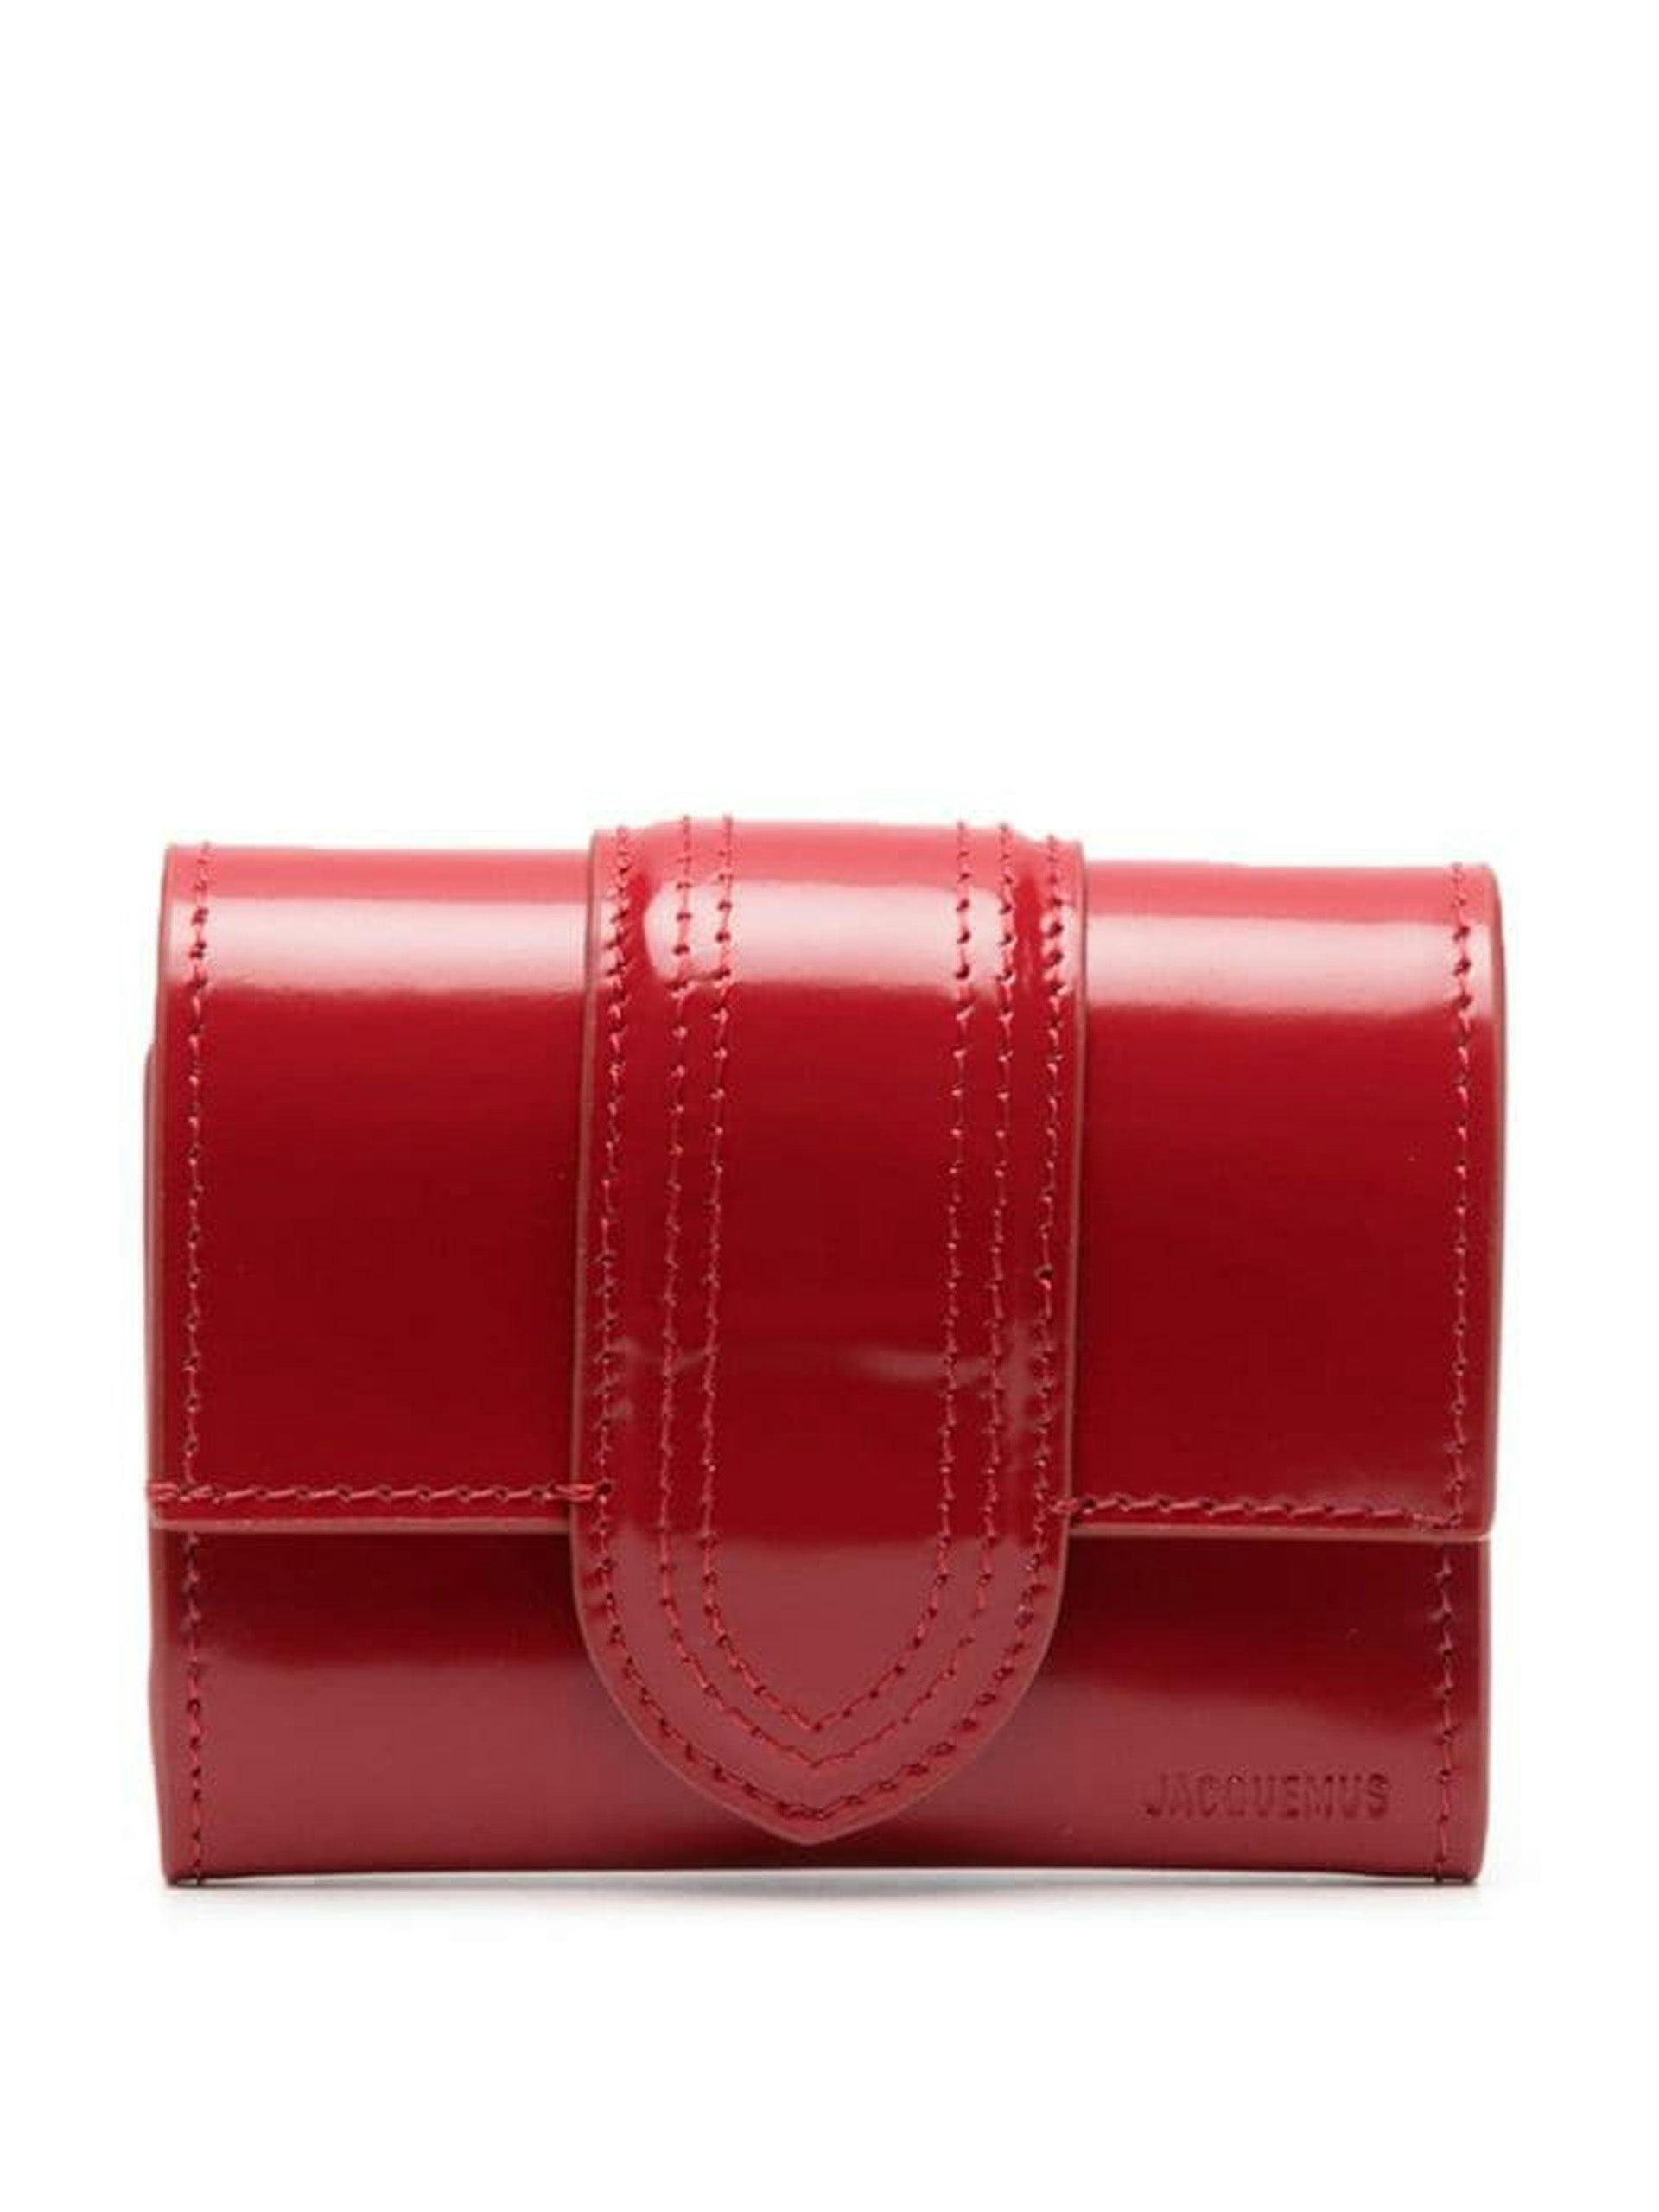 Le Compact Bambino leather wallet